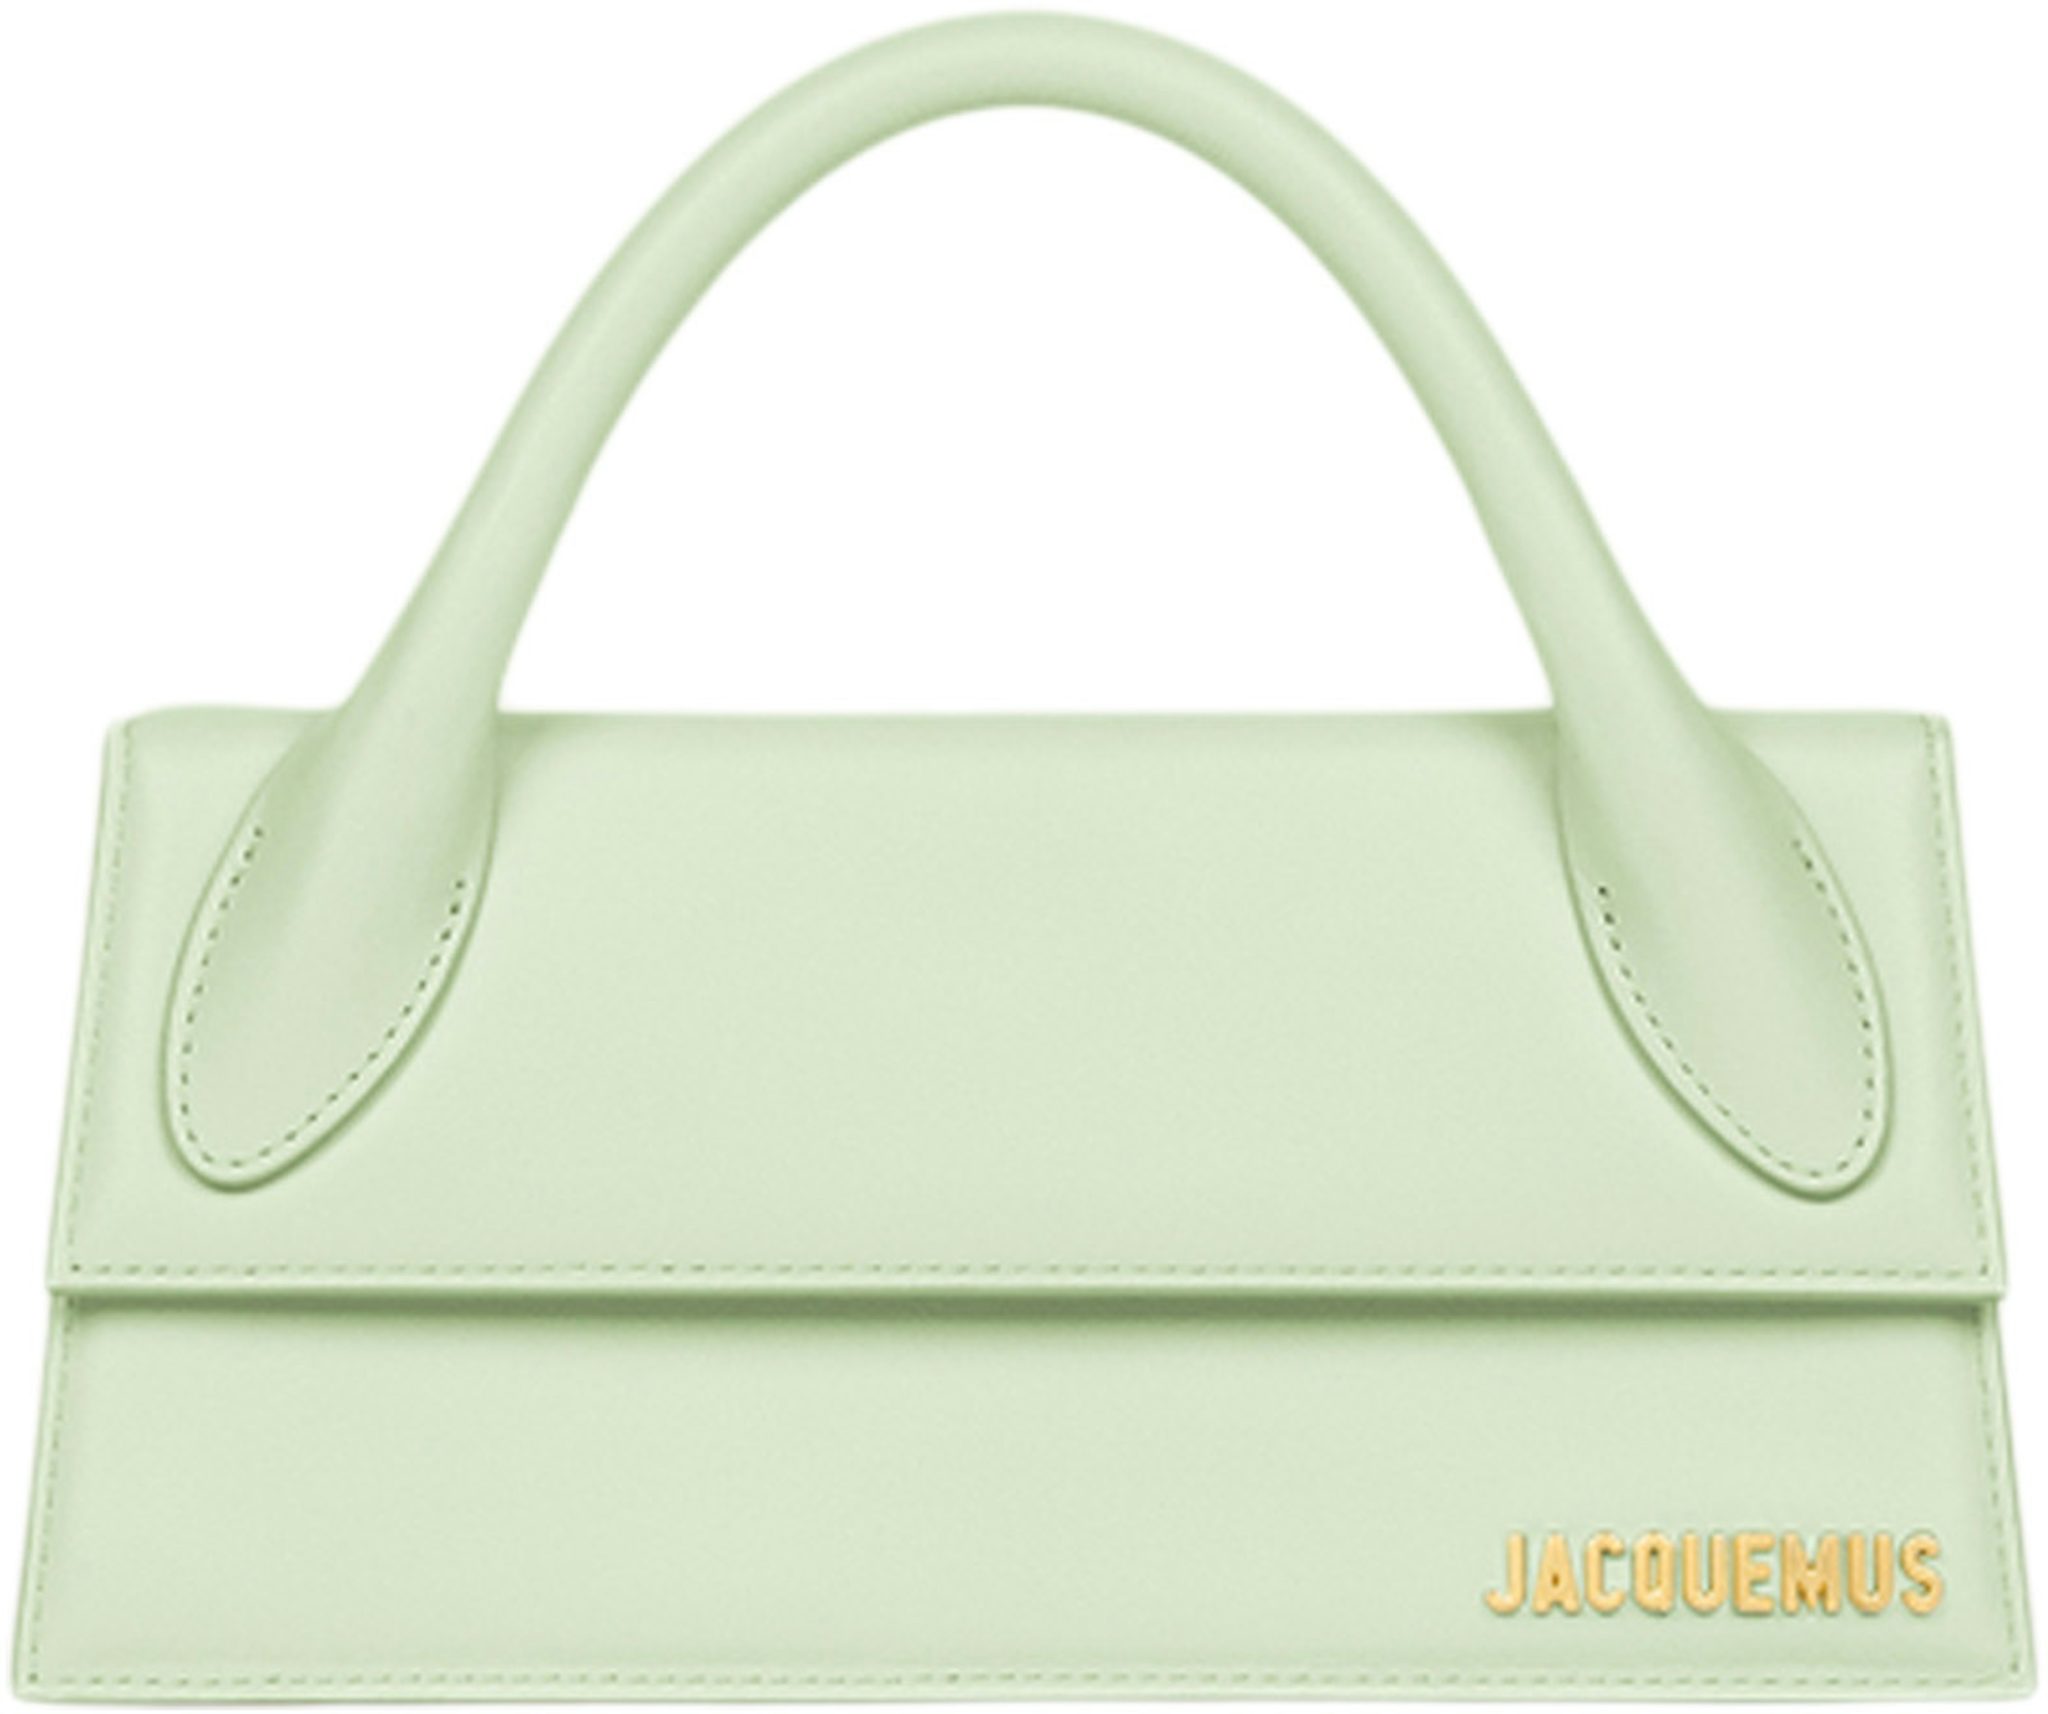 Jacquemus Le Chiquito Bag Leather Long Green 2341871